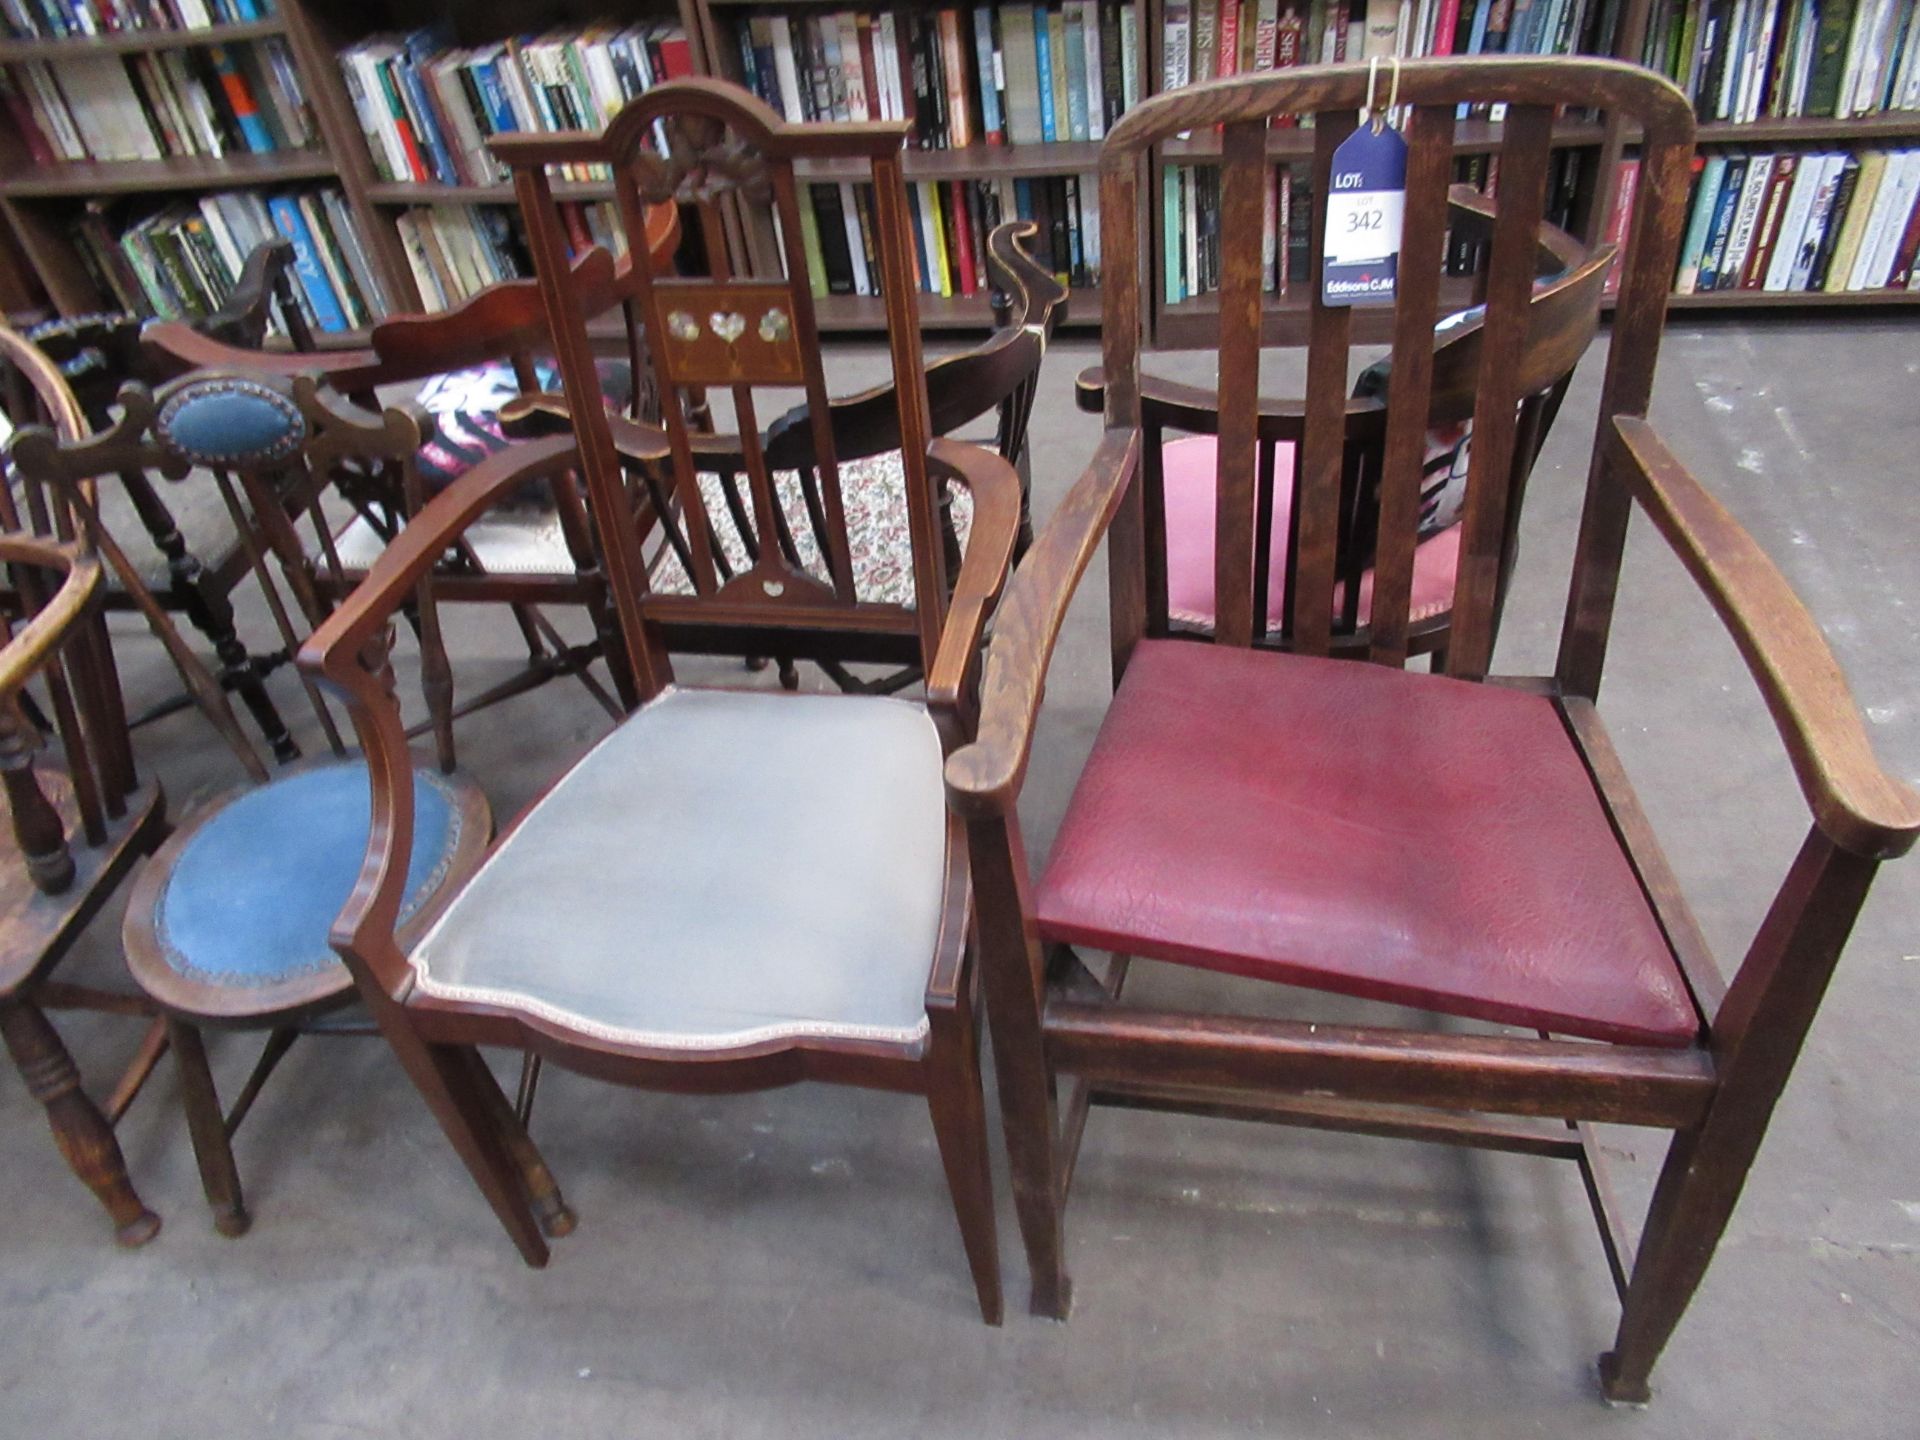 Two Carver Chairs with Another Chair